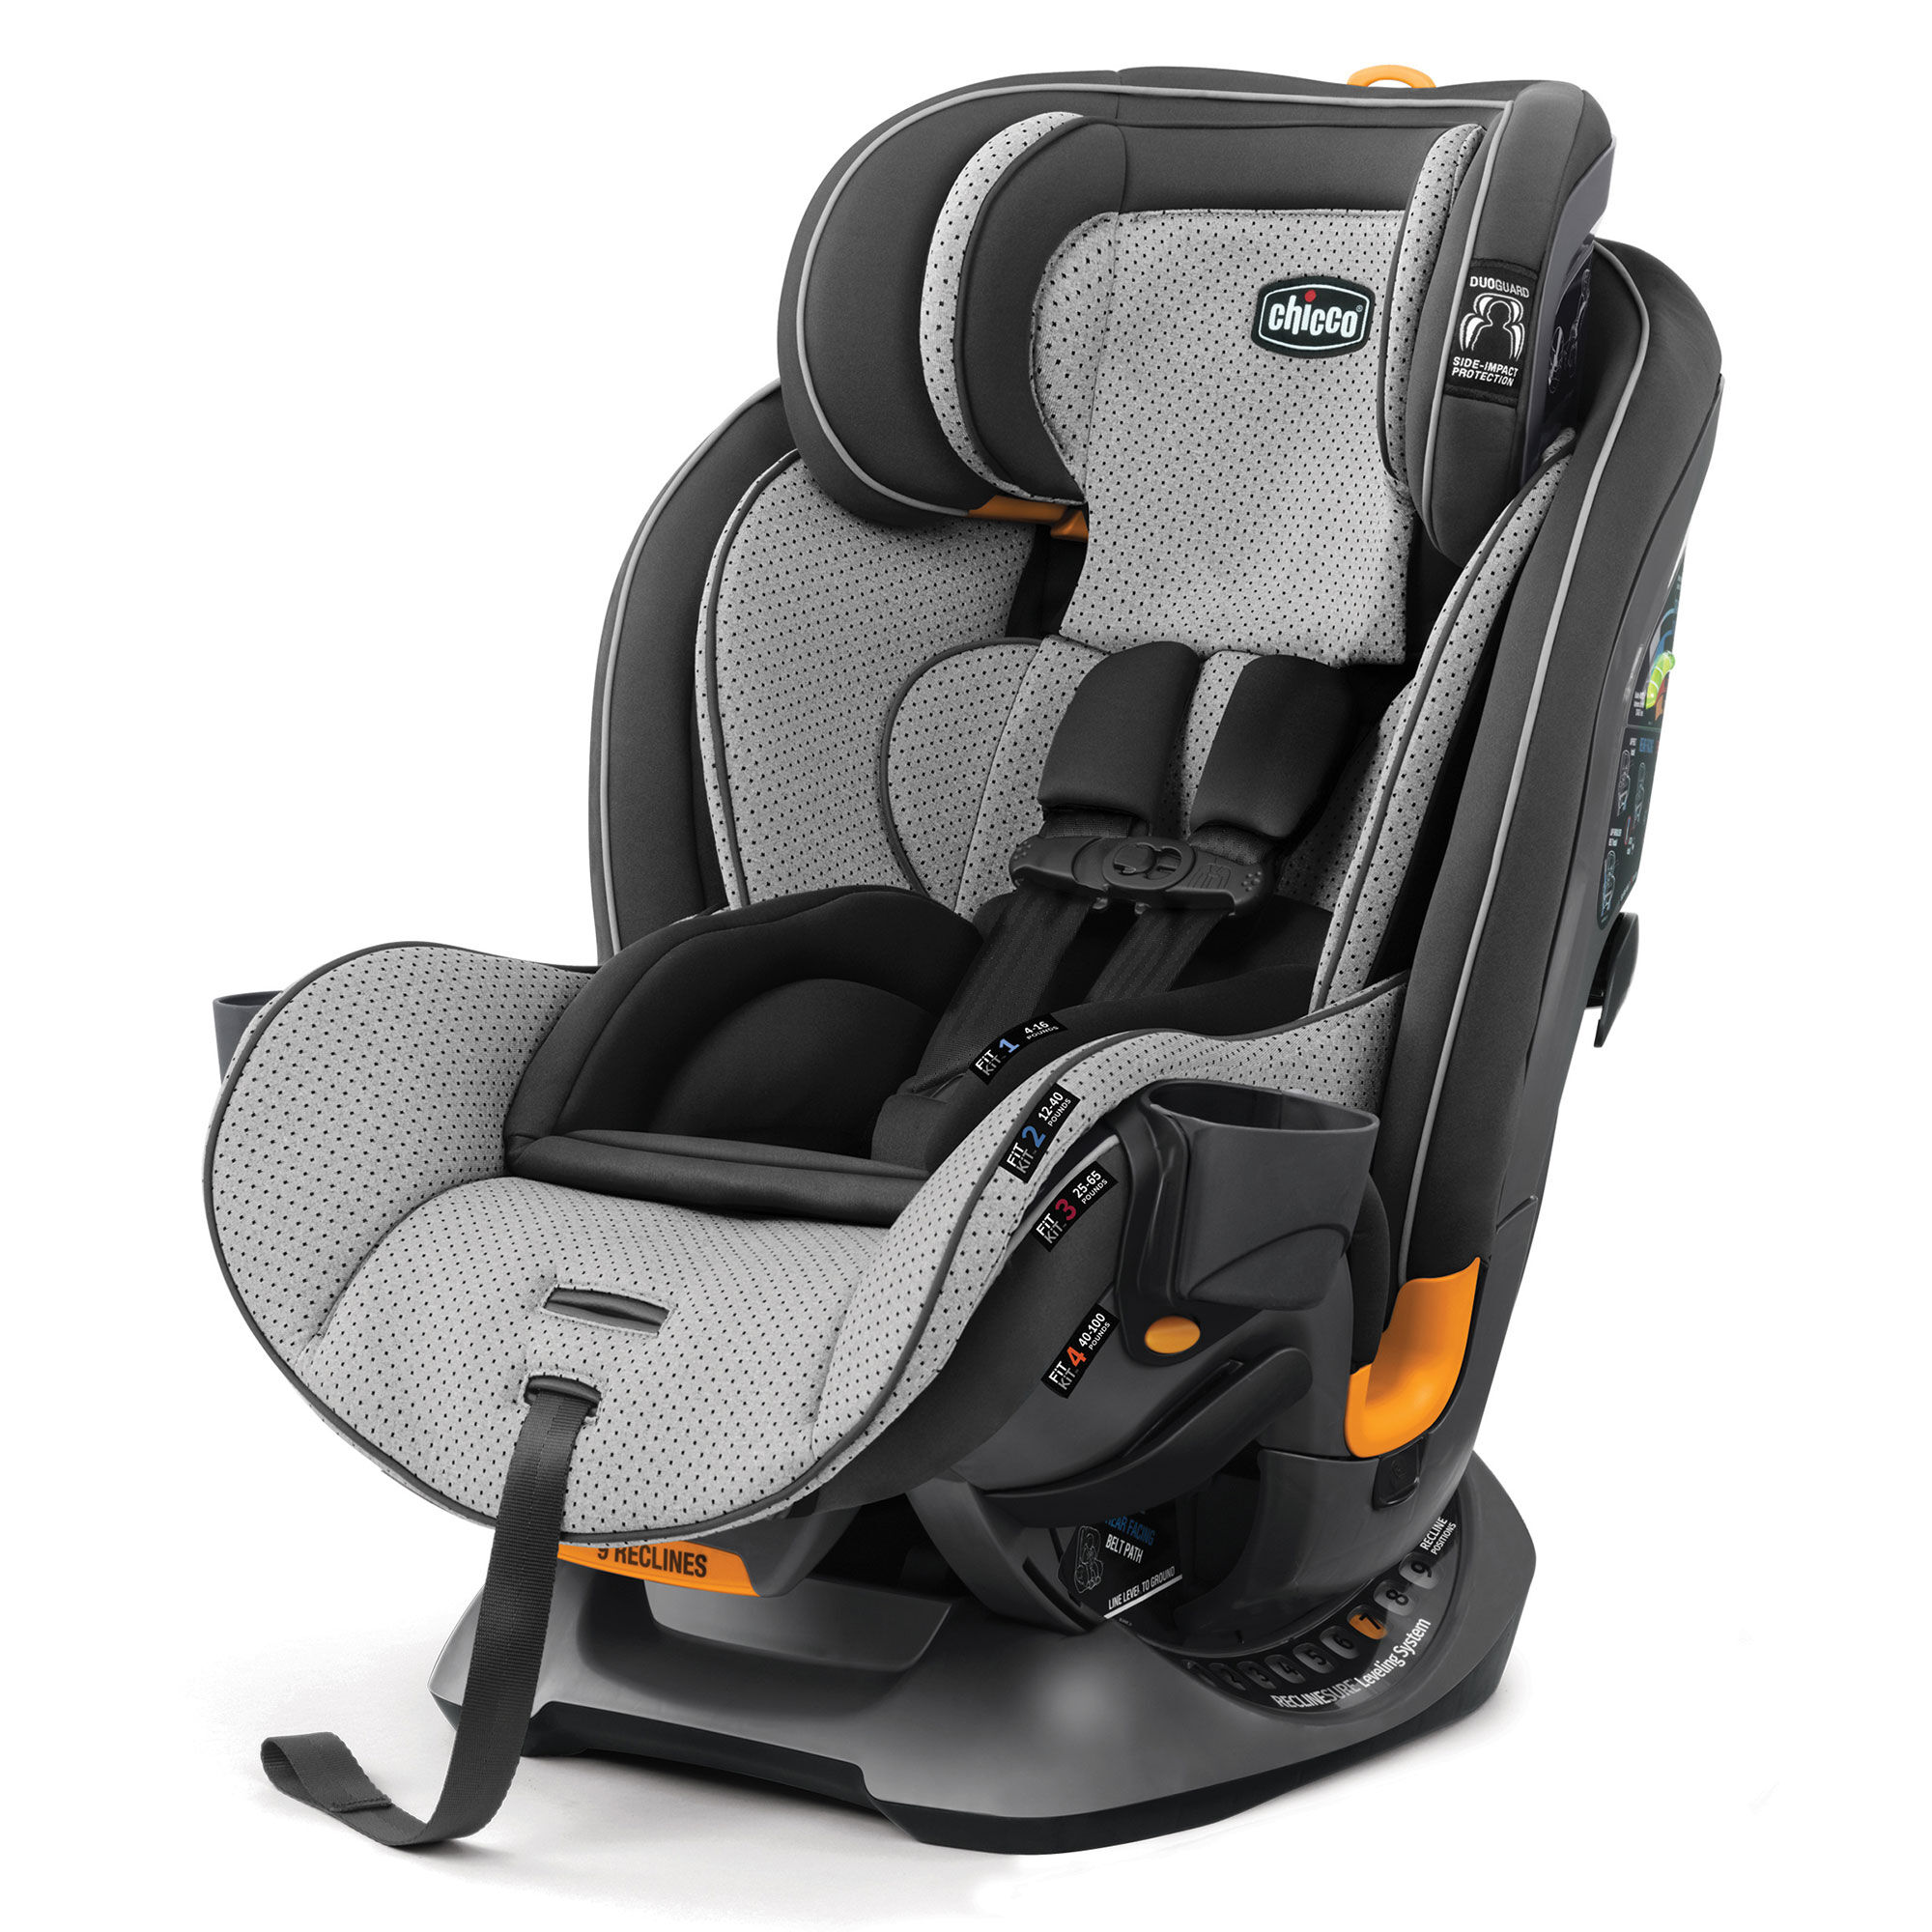 chicco infant seat